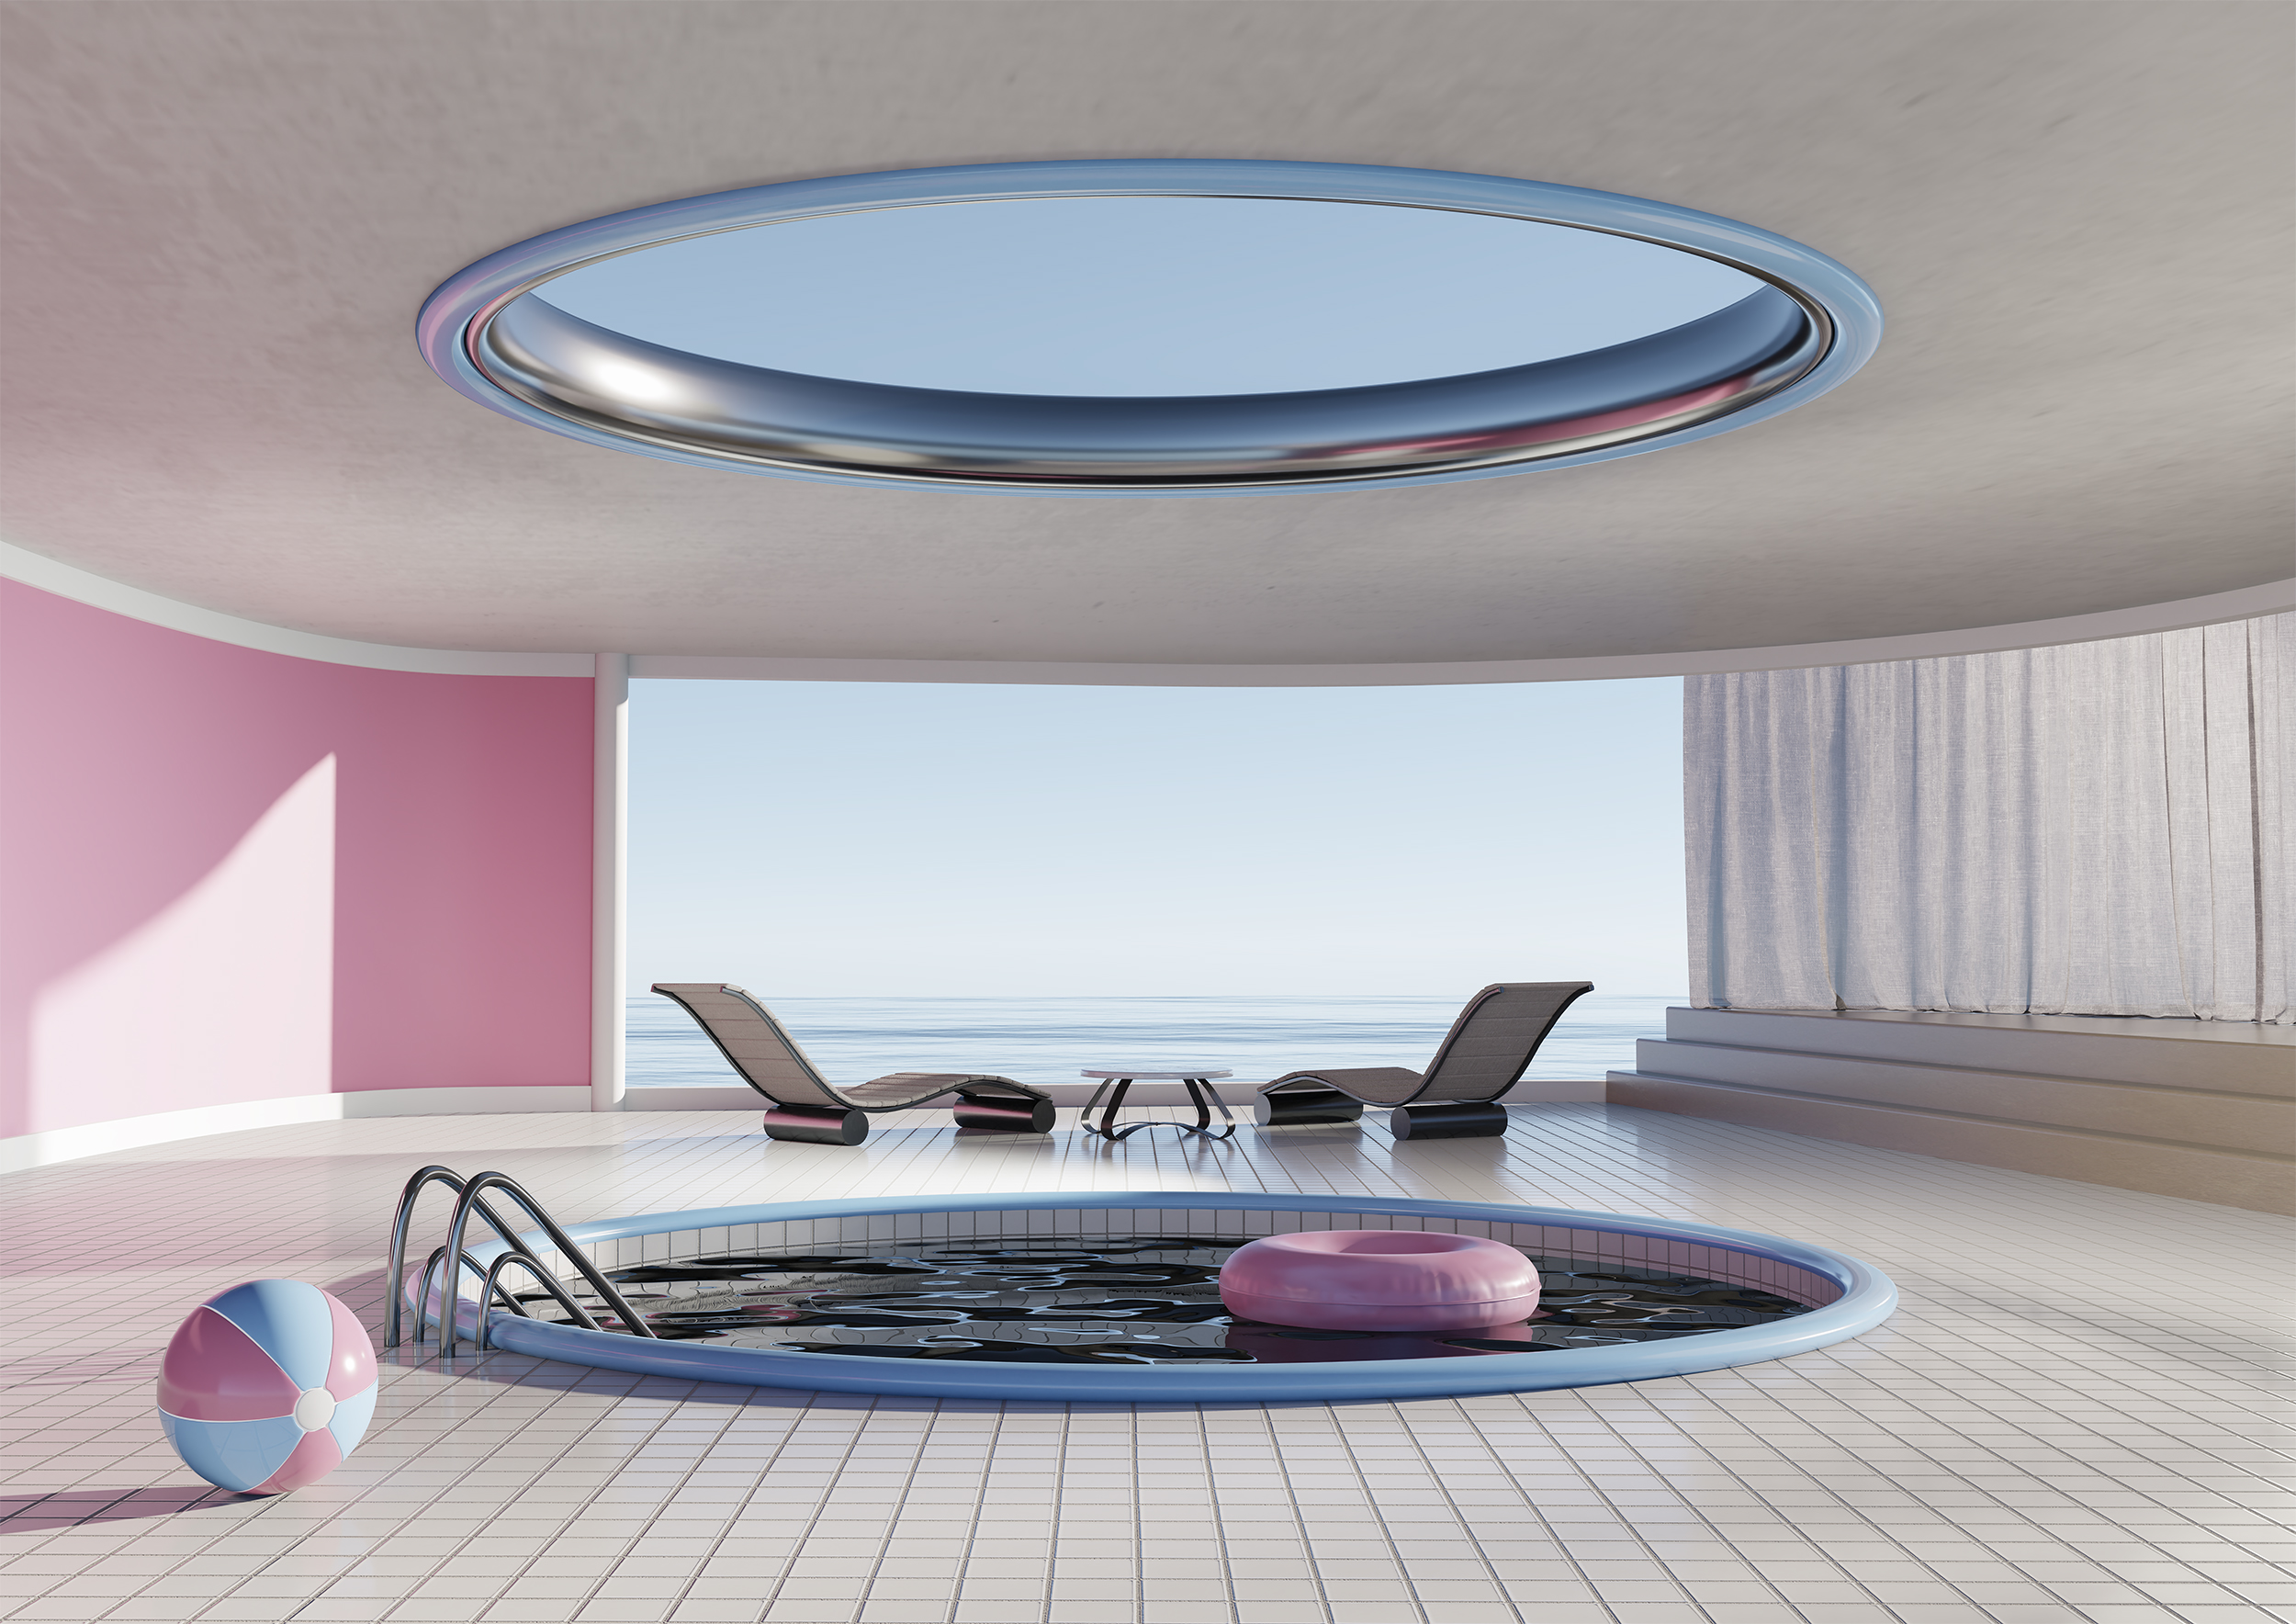 BA photography work by Chris Gardiner depicting a 3D render of a swimming pooler with a pink rubber ring, pink and blue beach ball and 2 chairs behind the pool.